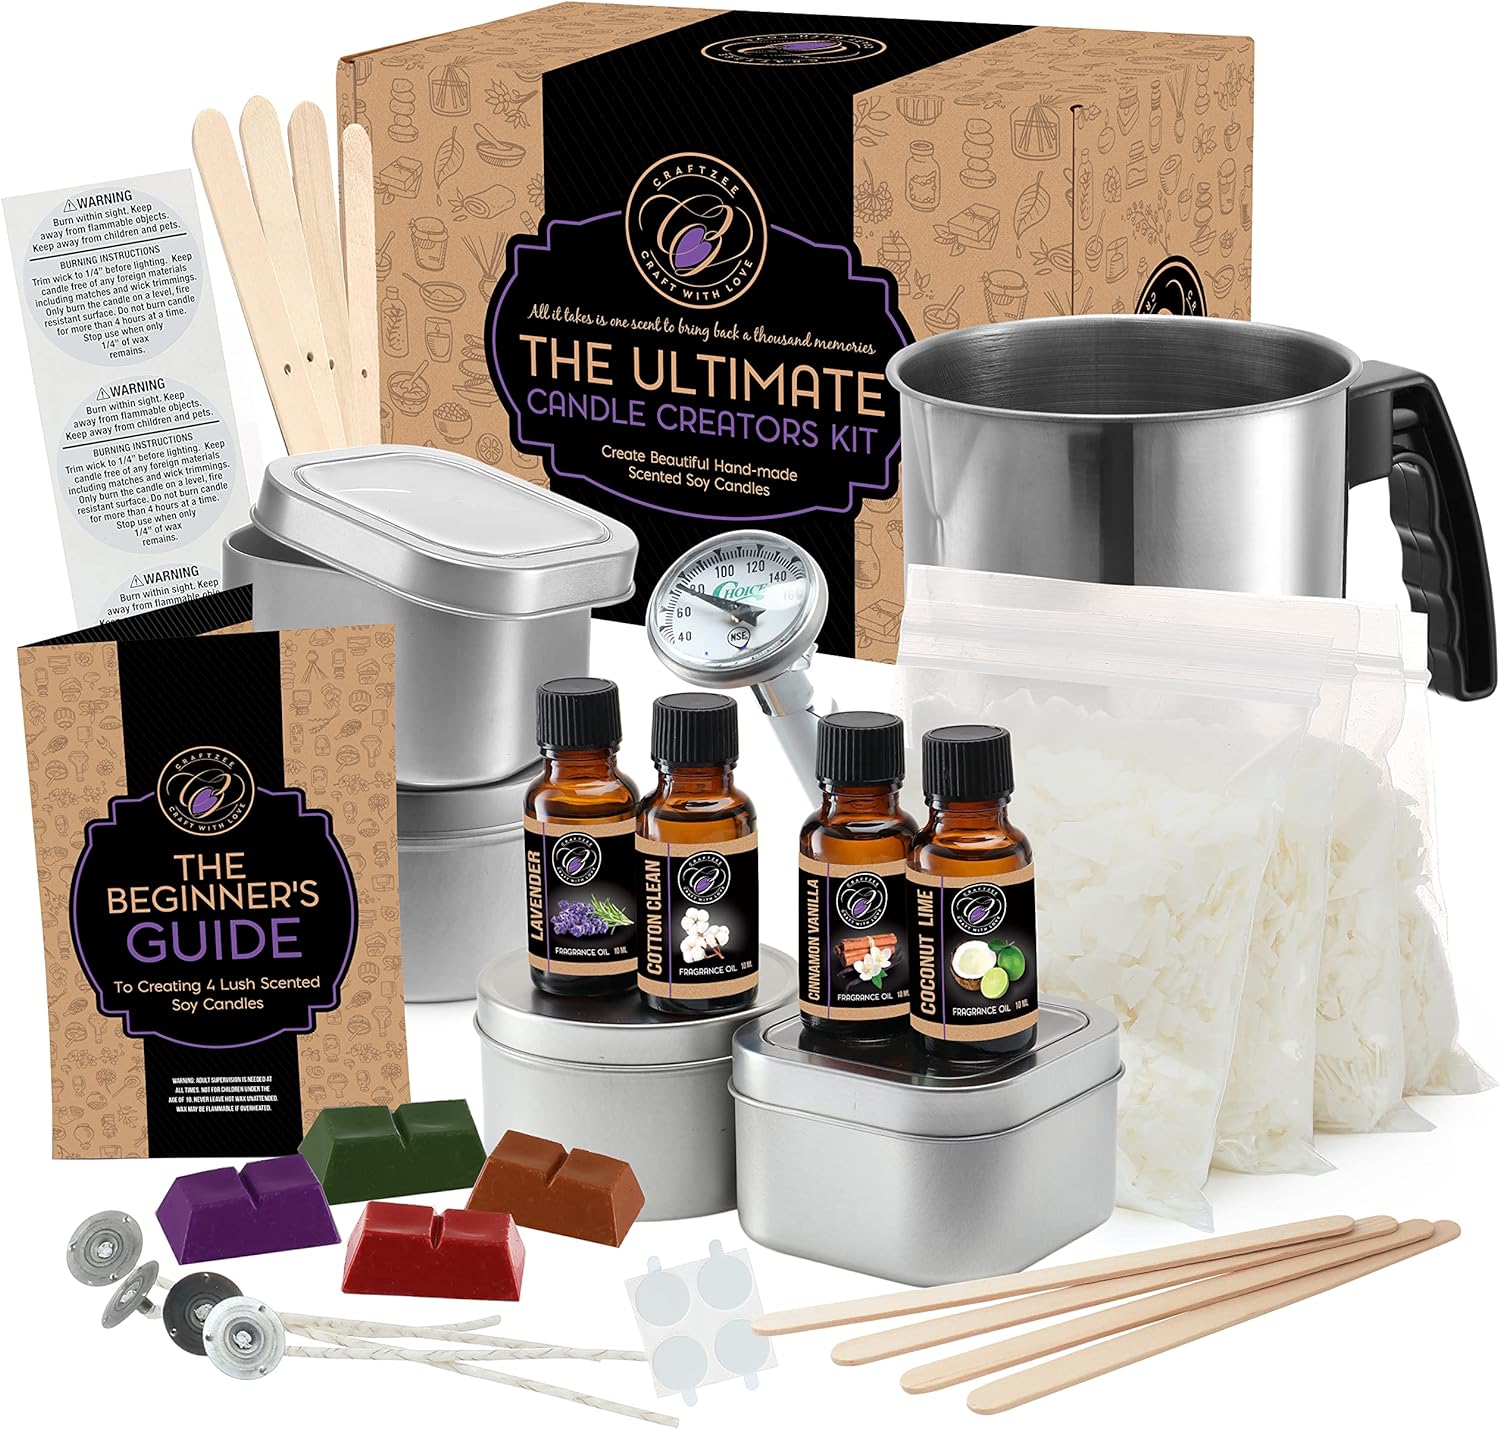 Candle Making Kit - DIY Adults, Kids Beginner Complete Scented Candle  Making Kit